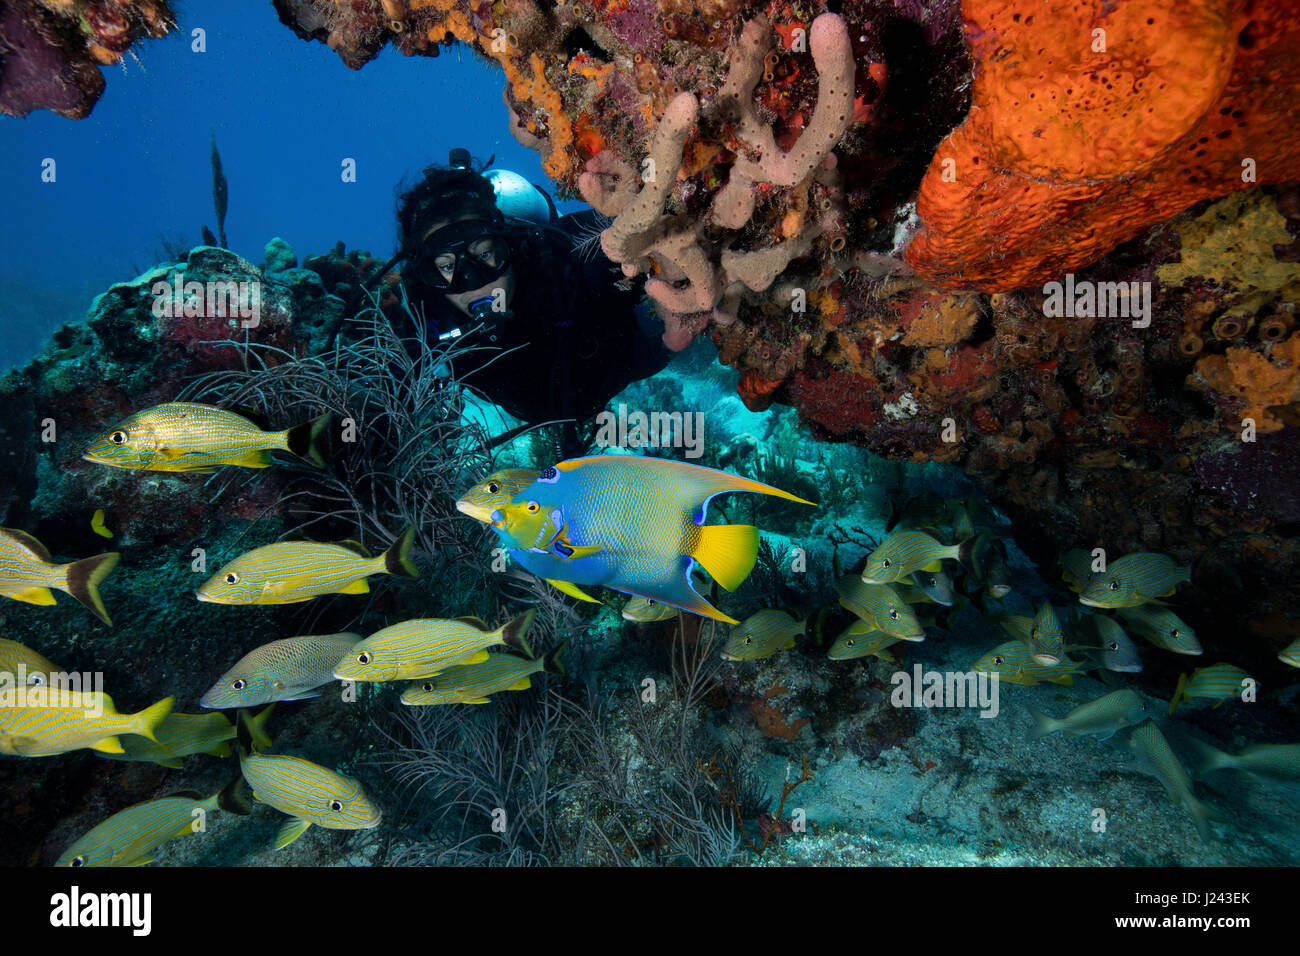 Reef scene with scuba diver and schooling fish. Stock Photo